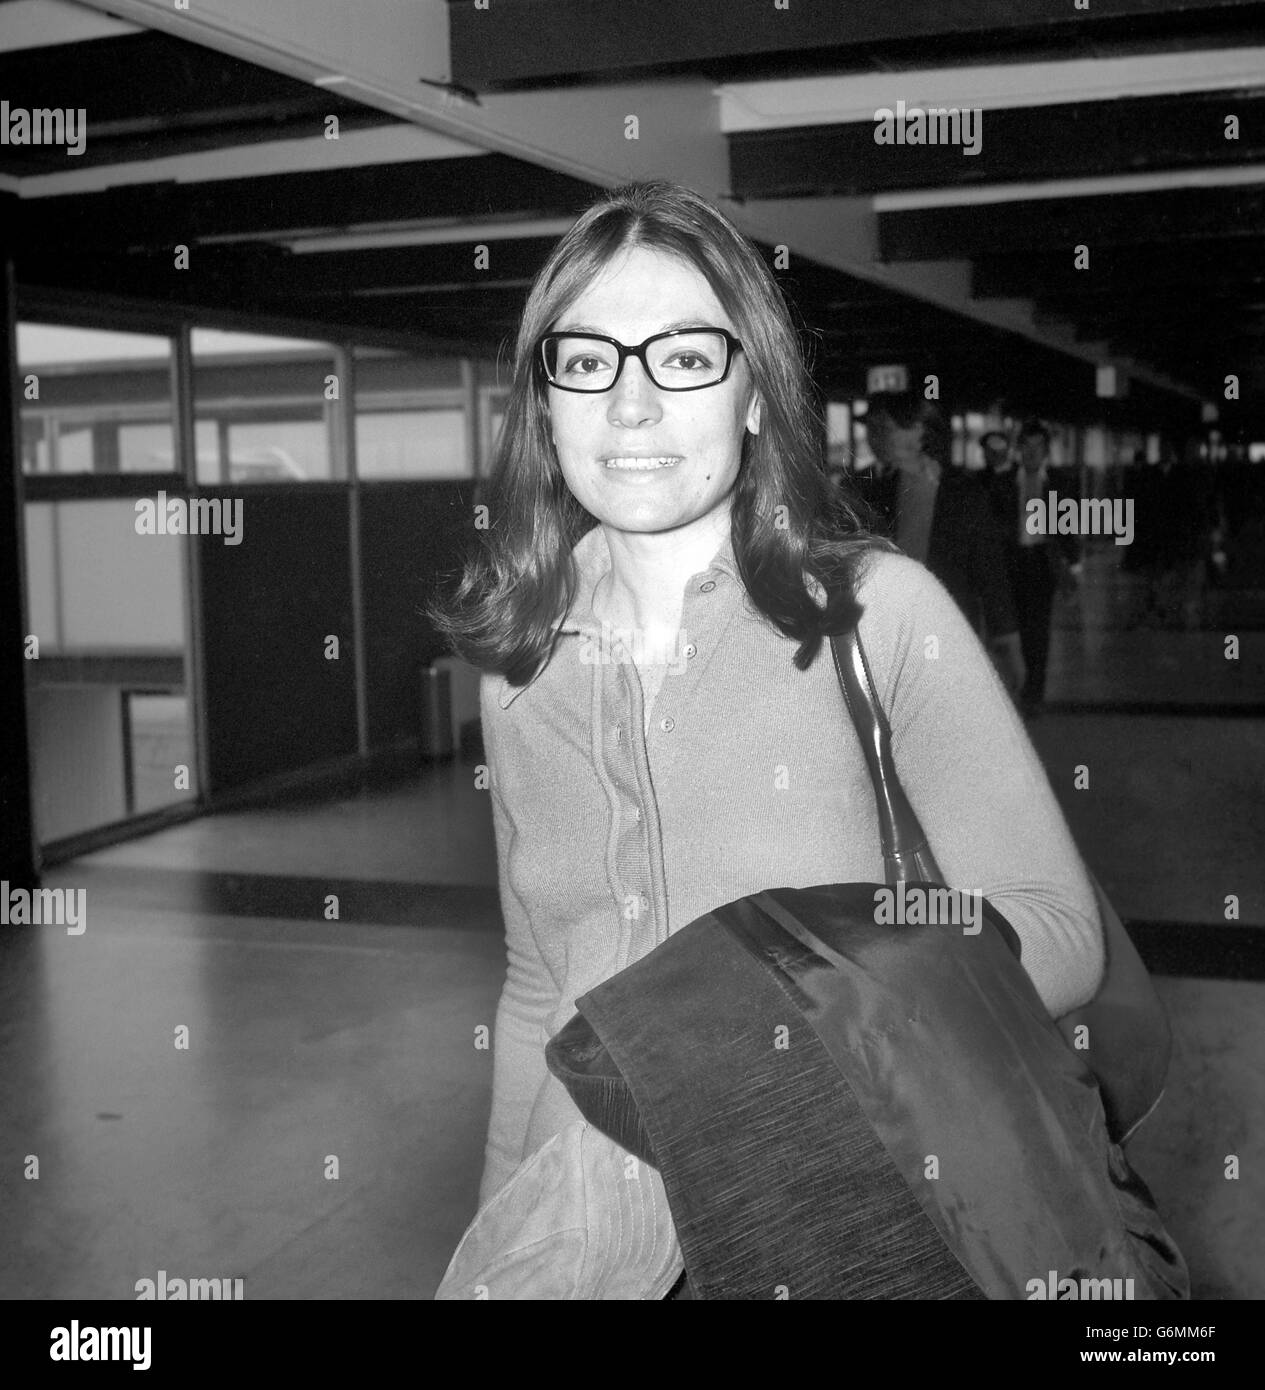 Greek singer Nana Mouskouri at Heathrow Airport, London, to attend a reception at the Savoy Hotel, where she will be presented with a golden disc for her long-playing record 'Over and Over'. Nana's new BBC television series starts on Thursday and the following day she begins a nationwide tour. Stock Photo